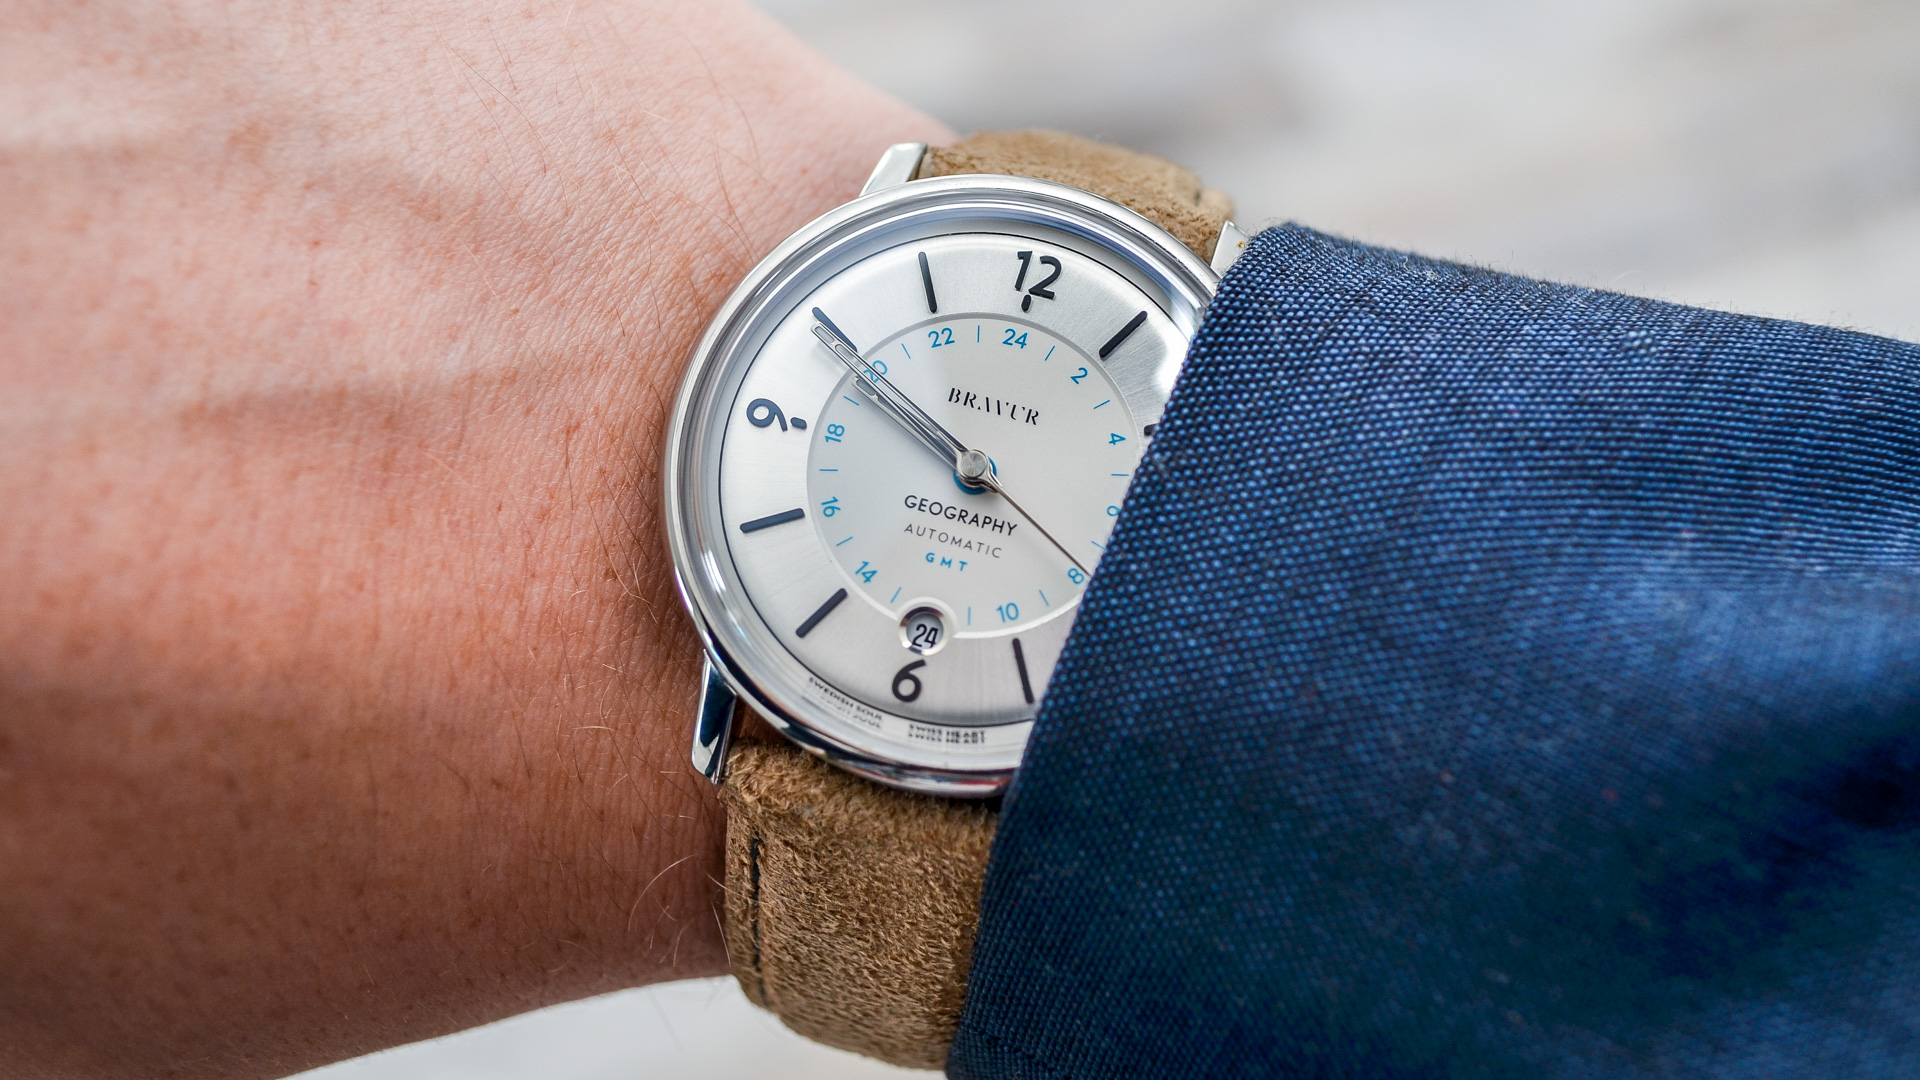 Wrist Time Review: Bravur Geography Sparkling White